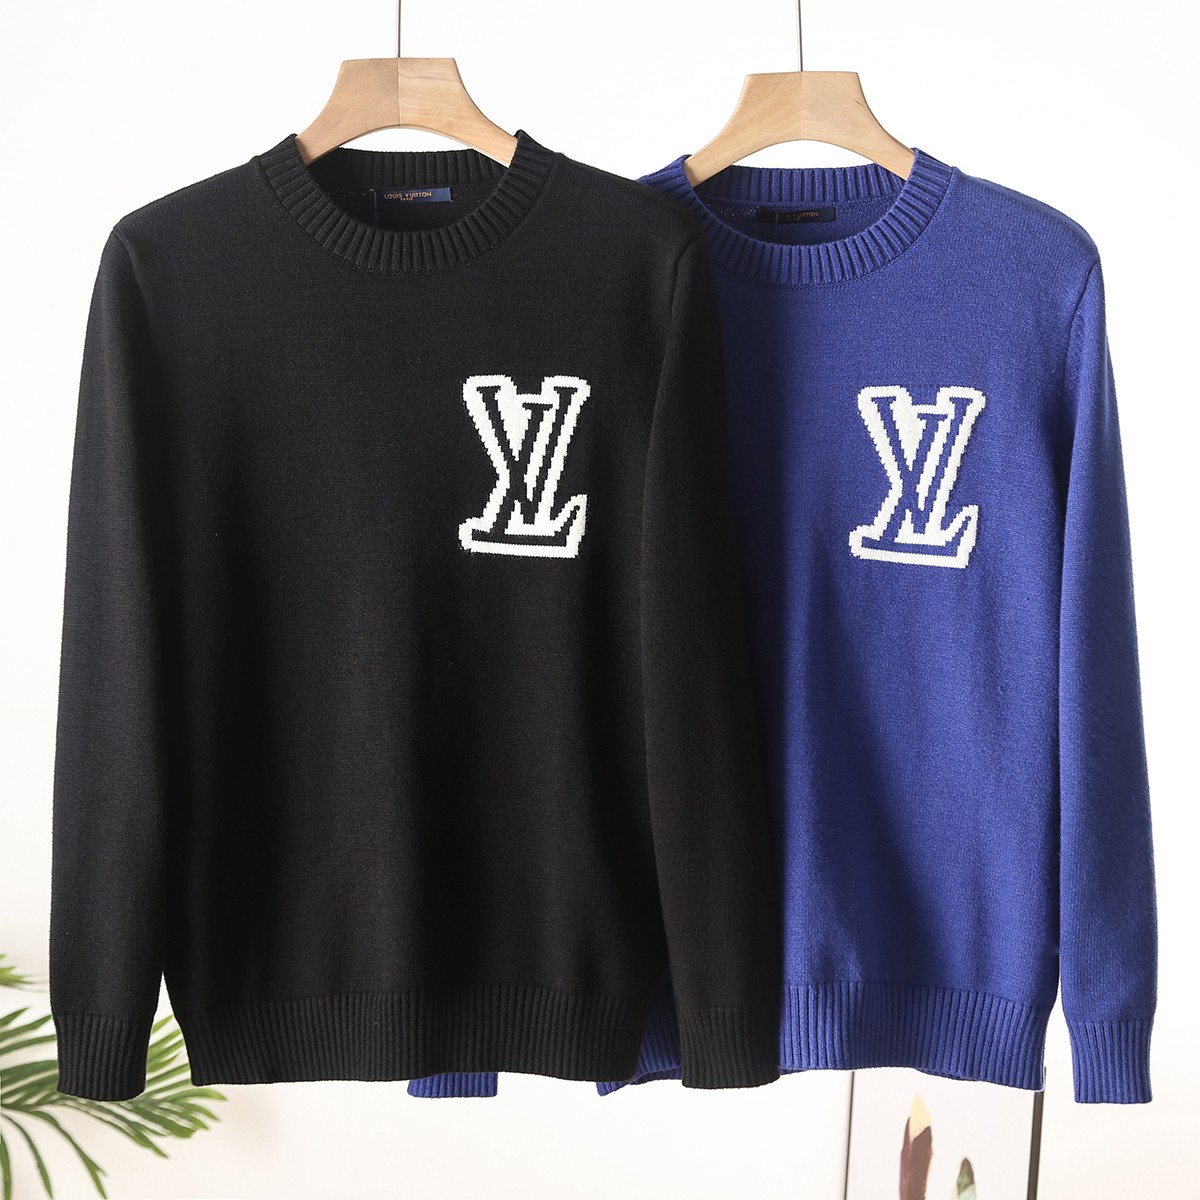 YUPOO-Louis Vuitton The Best Affordable Clothing LV Code: HC6426